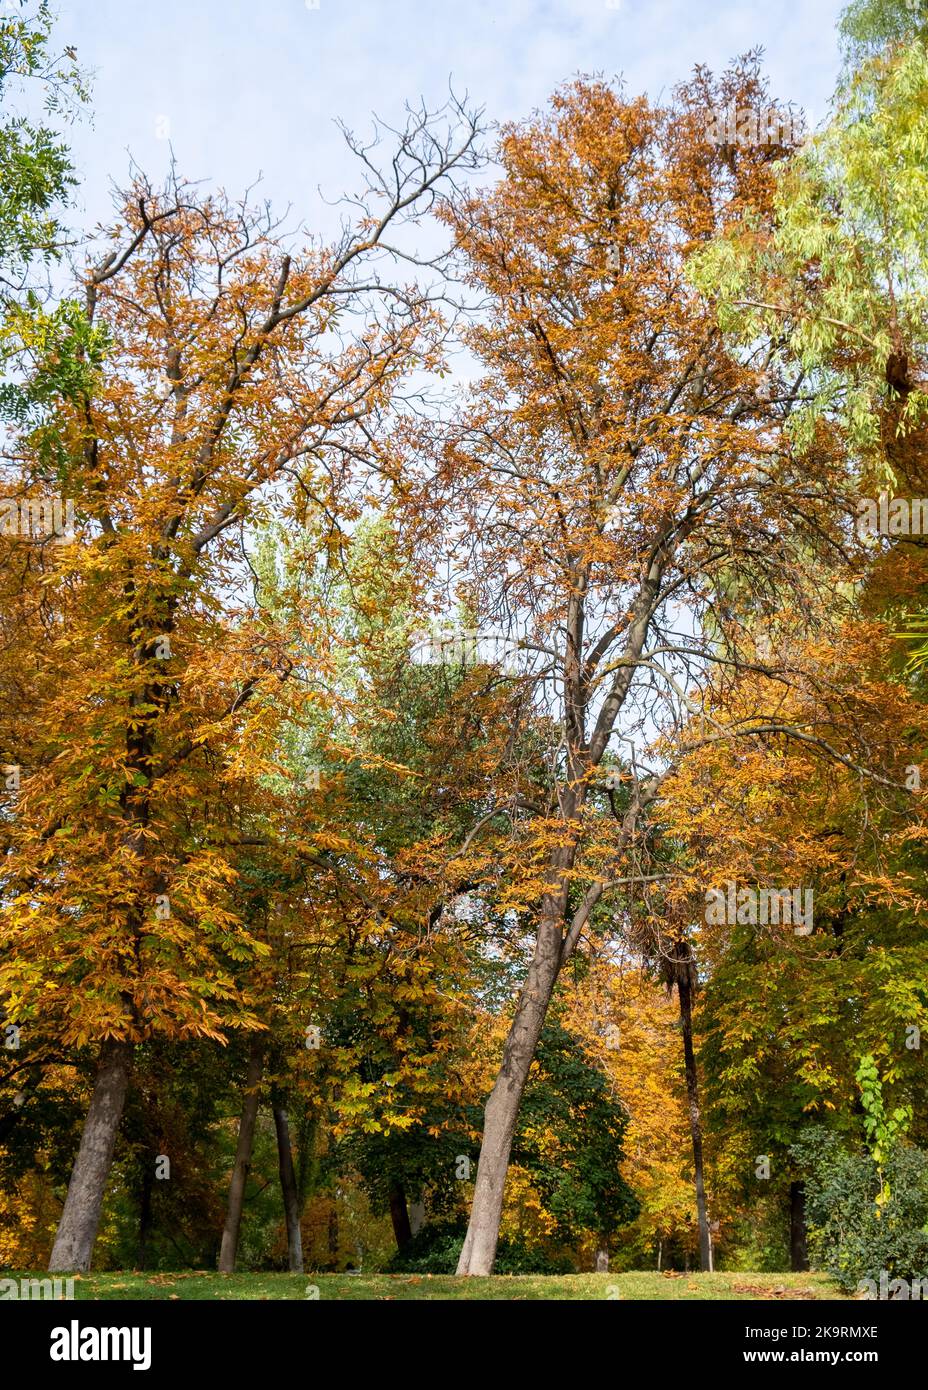 Autunm scene. Trees with green and orange leaves in a urban park Stock Photo